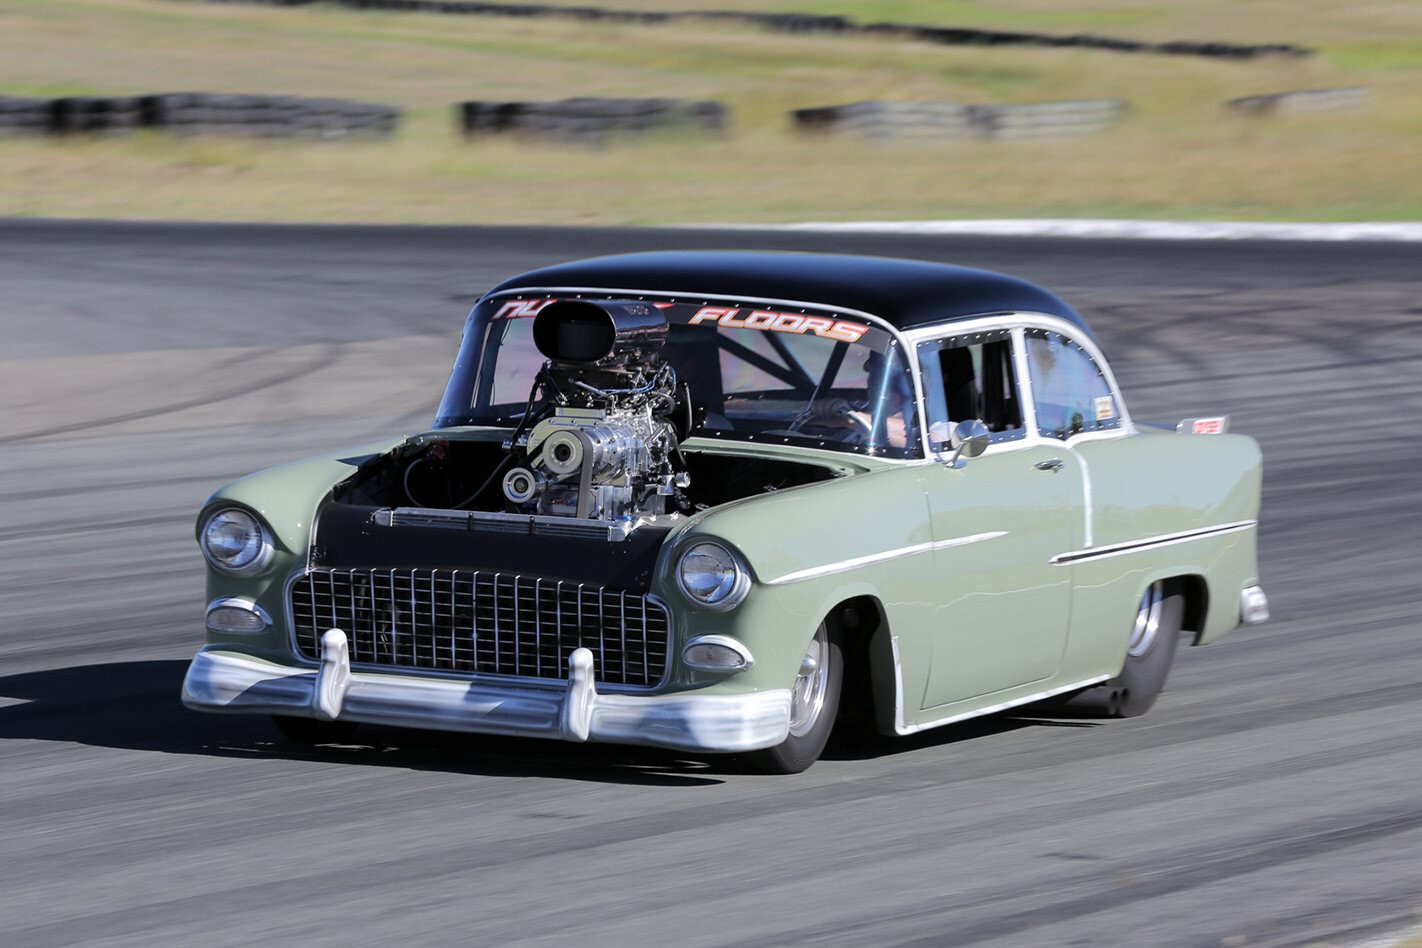 BLOWN 1955 CHEV WITH NITROUS FOR MORE POWER – VIDEO